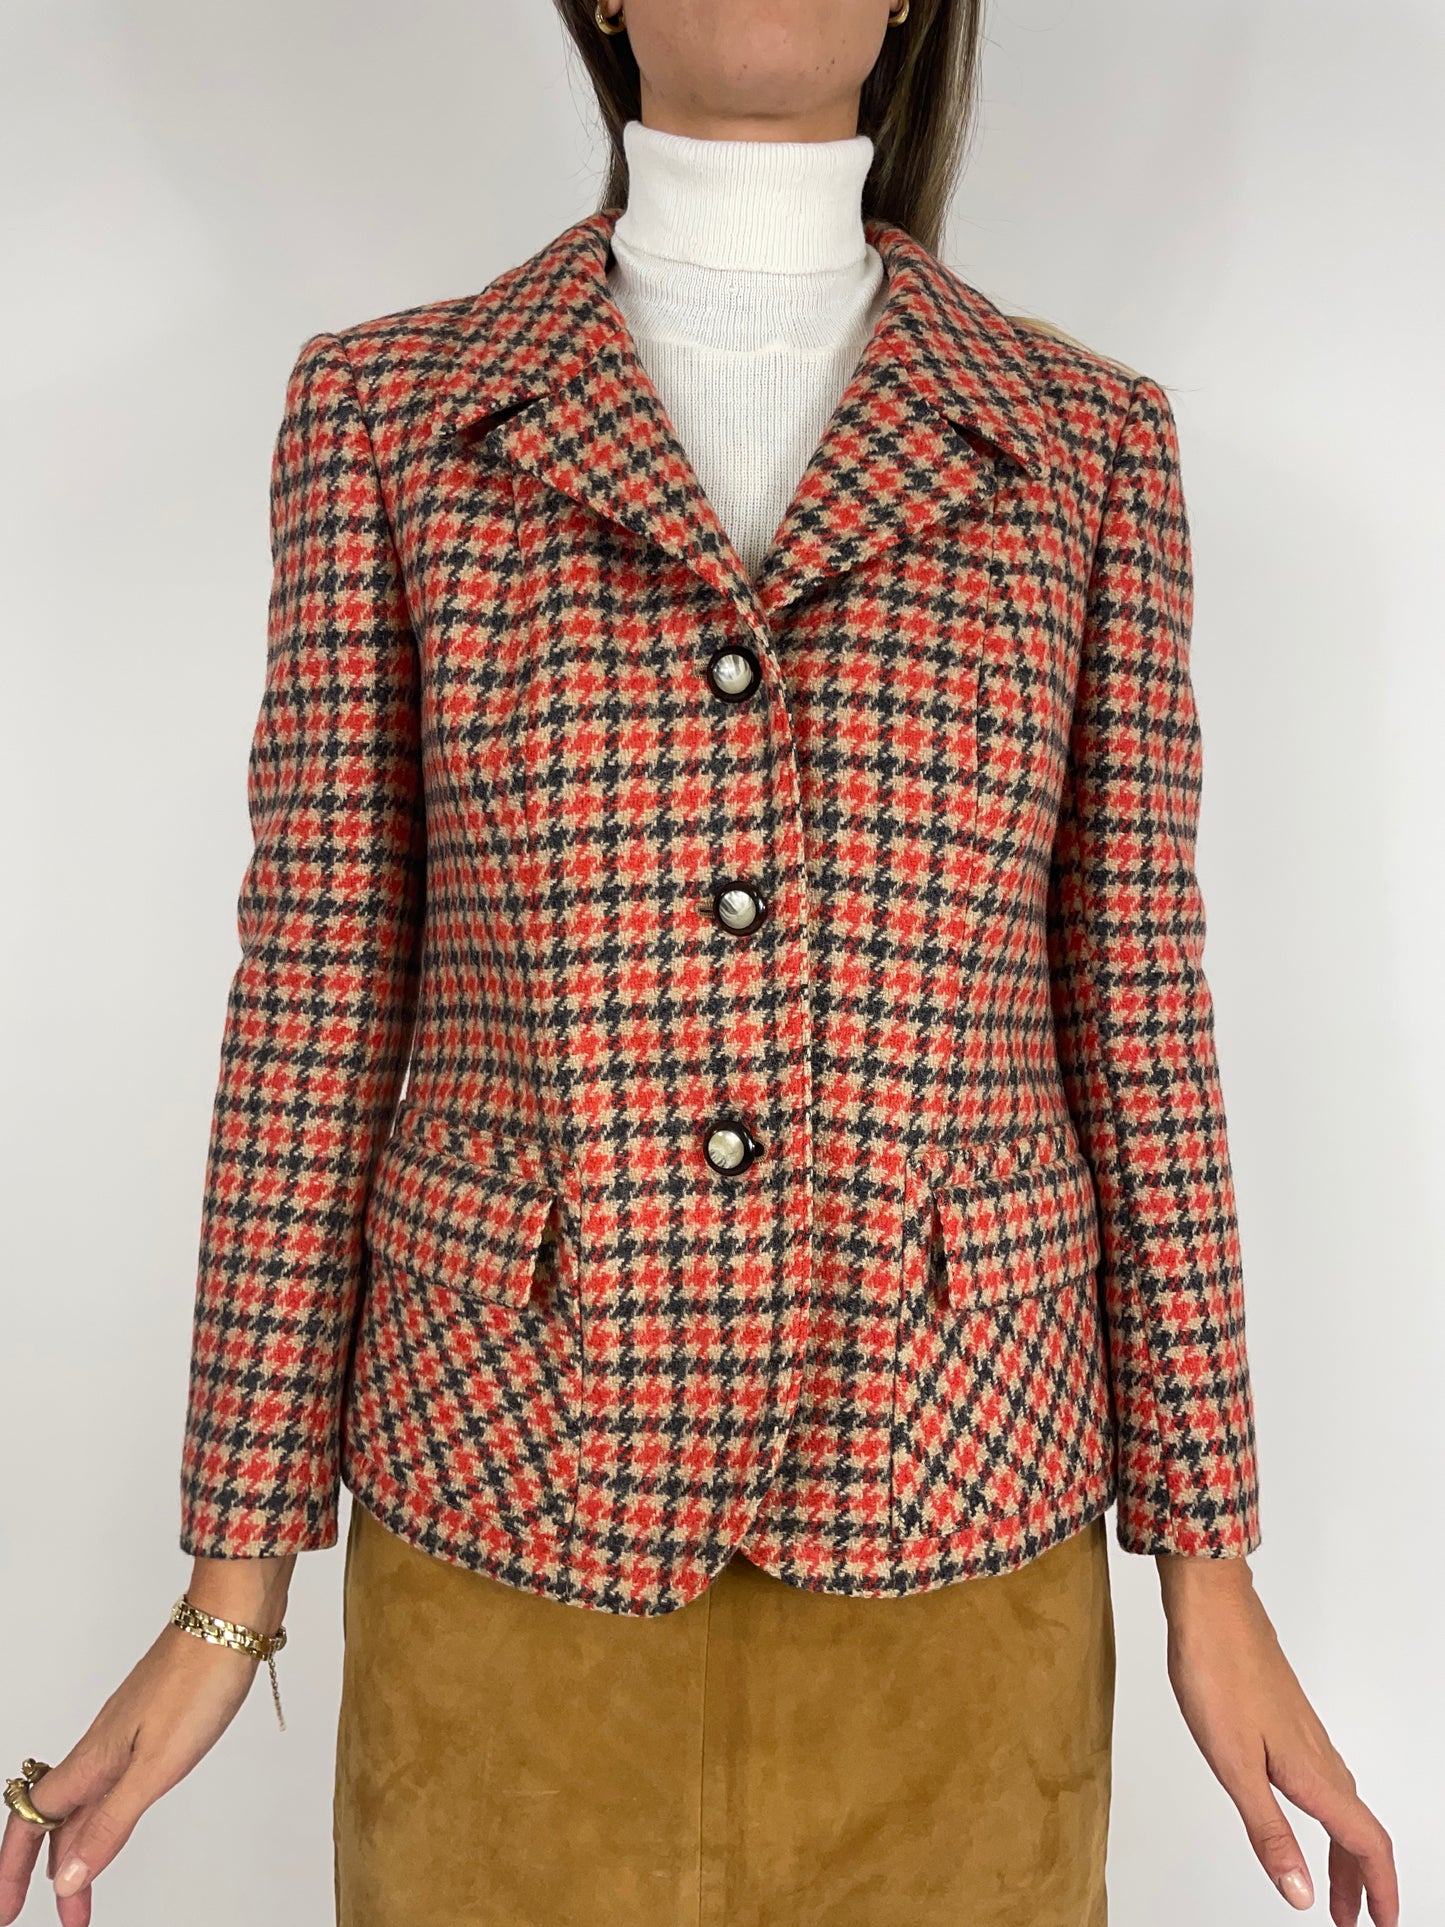 1970s houndstooth wool jacket